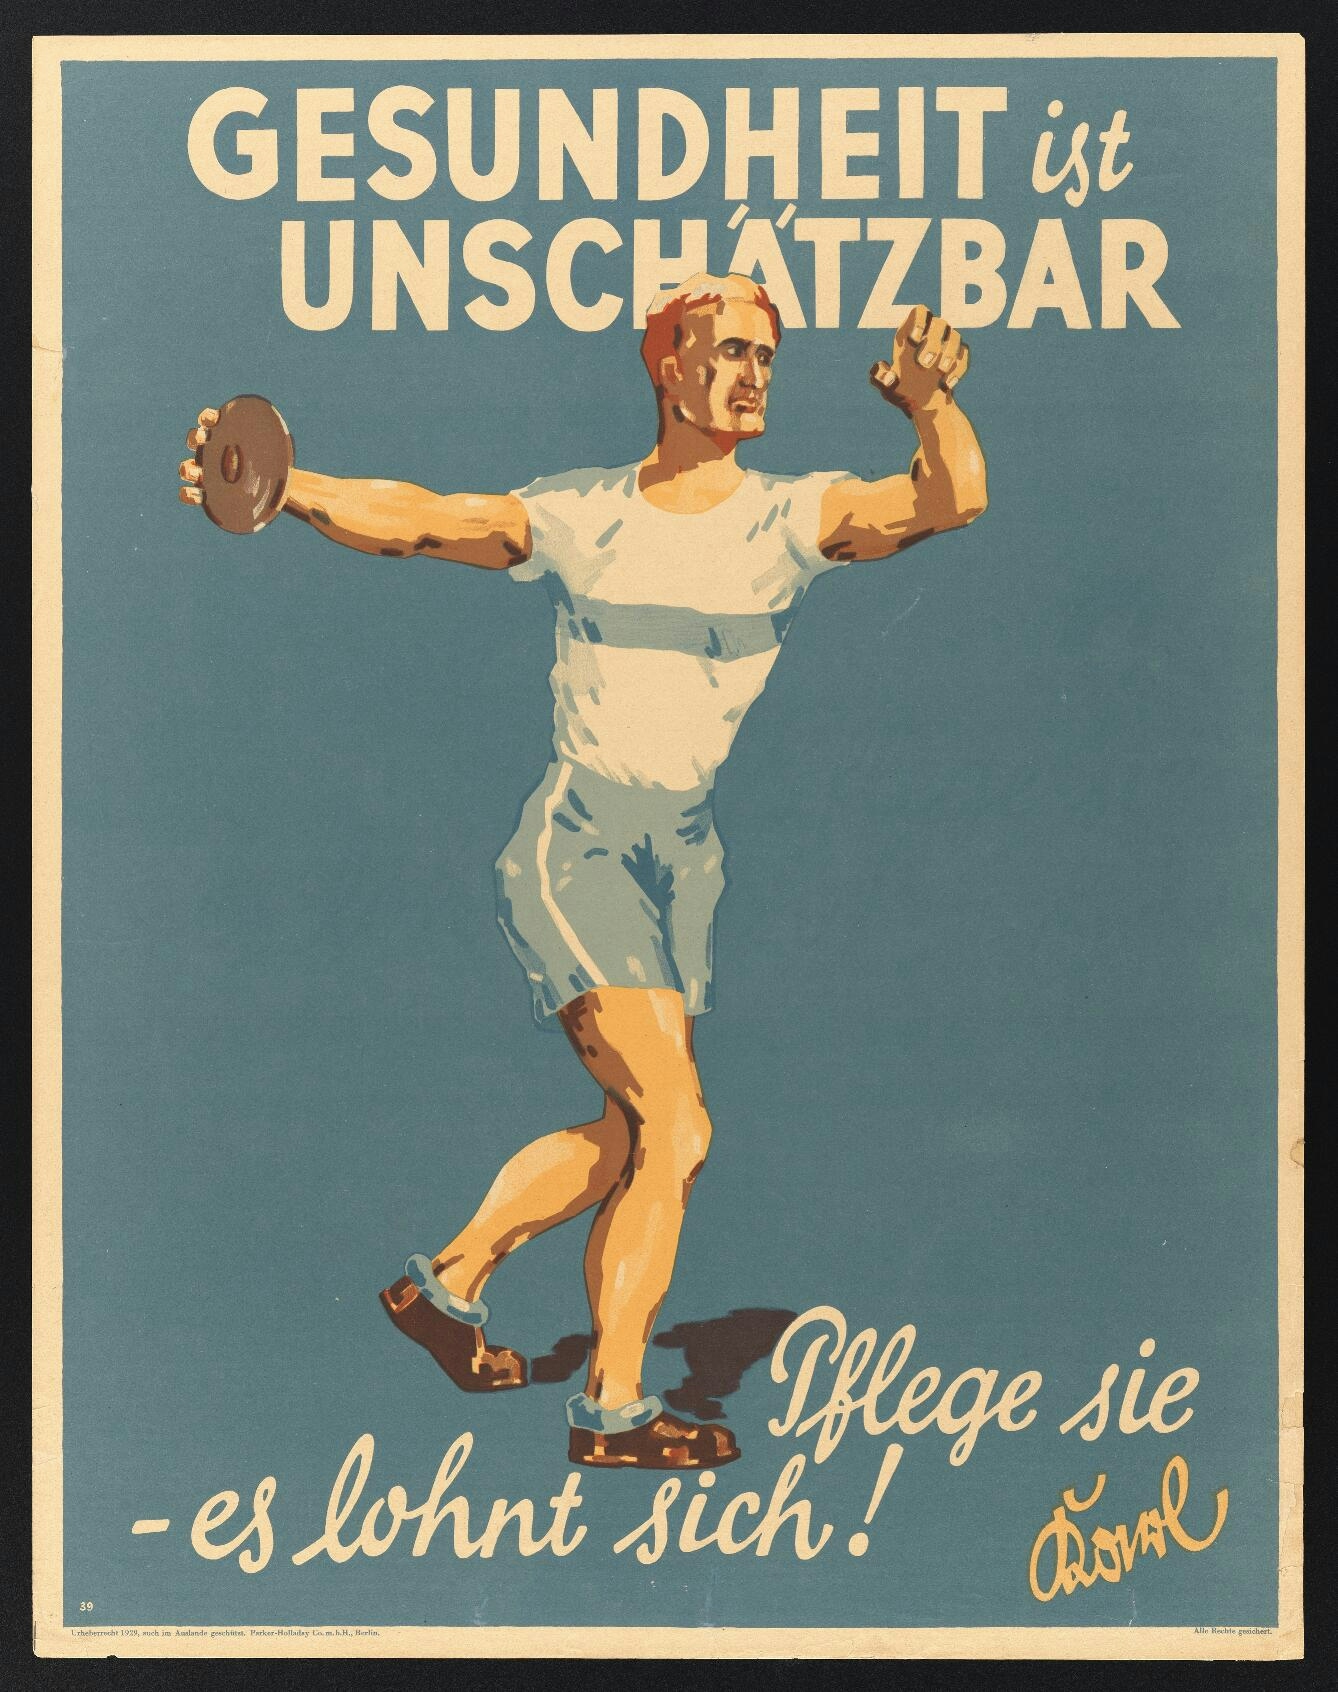 Colour poster with text in German: 'Gesundheit ist Unshatzbar' and an image of a man throwing a discus on a blue background